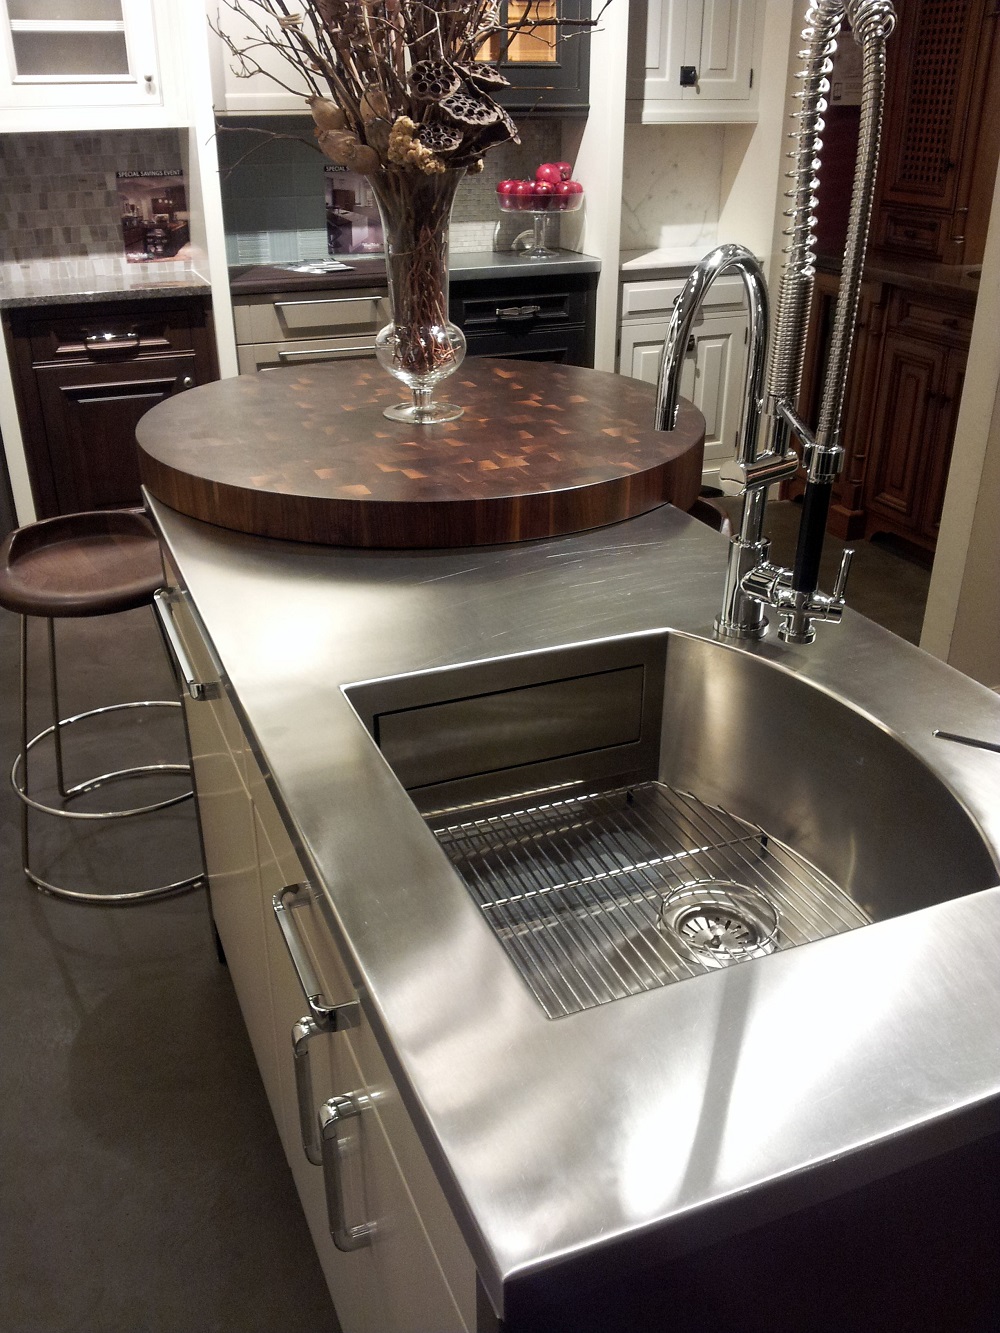 Cool countertop ideas for you to create that stellar kitchen